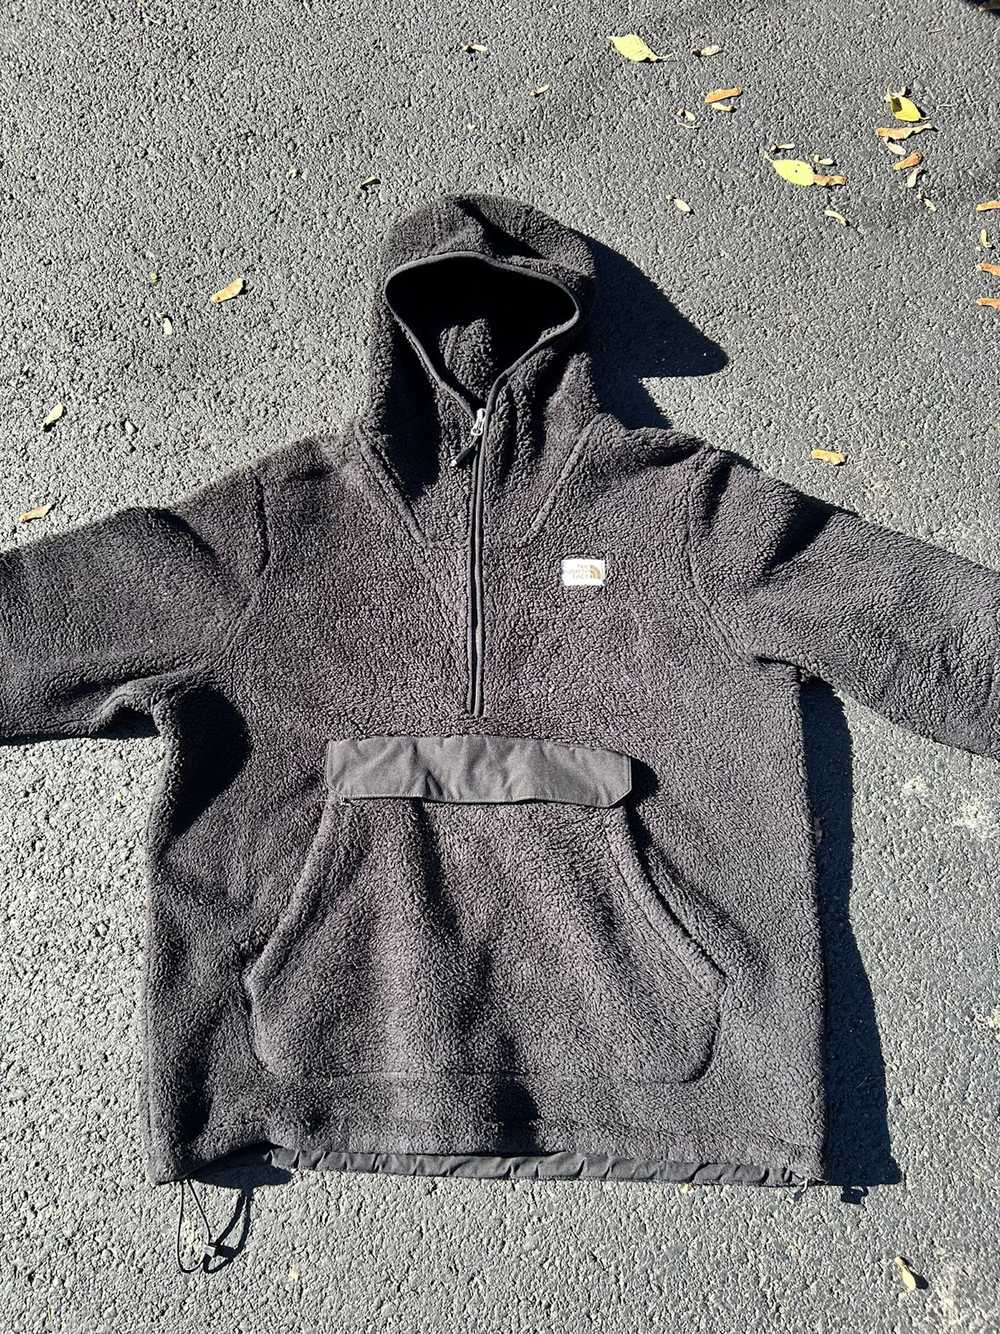 The North Face The North Face Sherpa Fleece hoodie - image 2